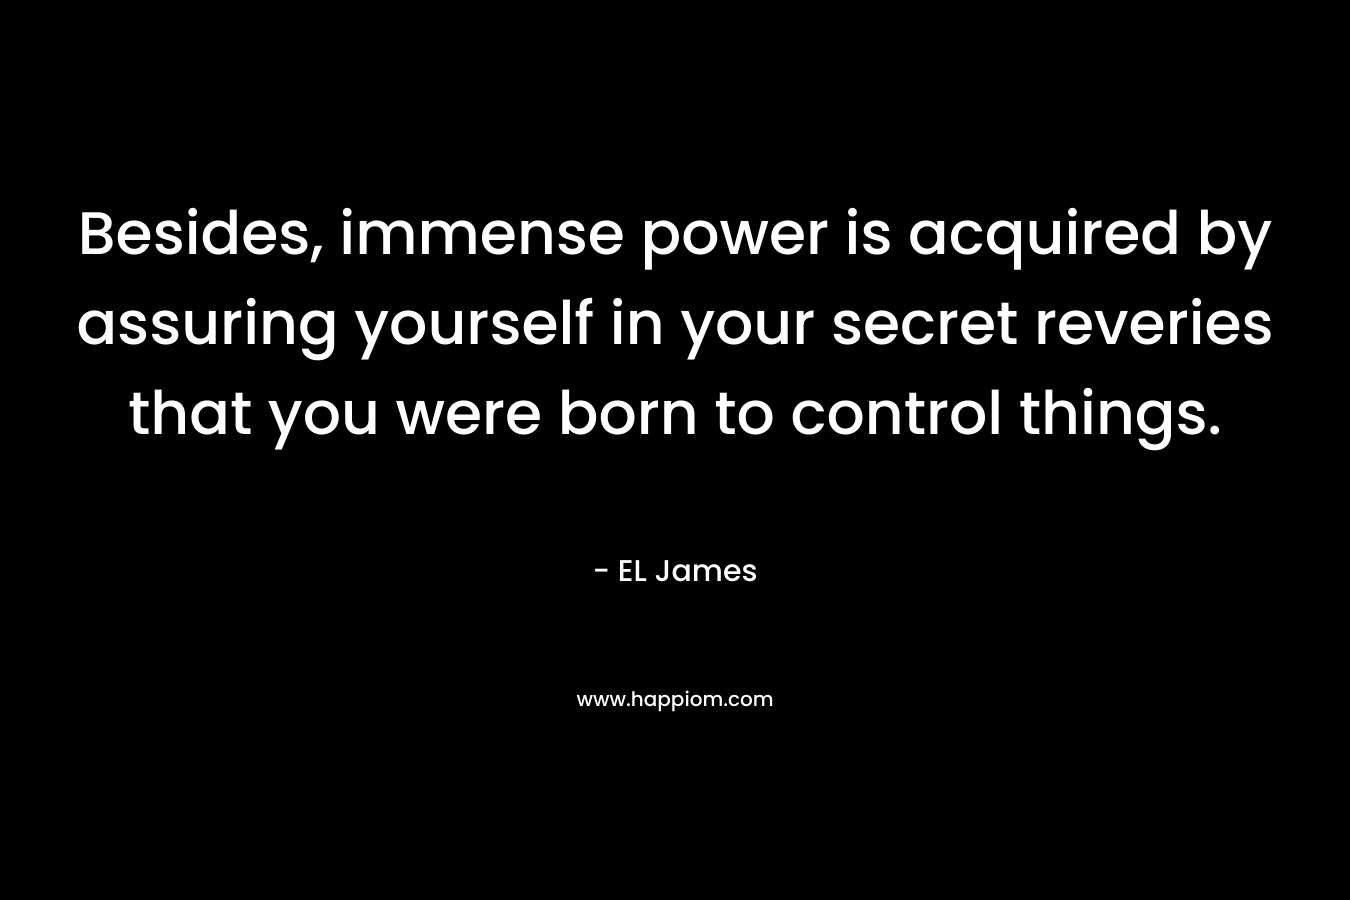 Besides, immense power is acquired by assuring yourself in your secret reveries that you were born to control things. – EL James